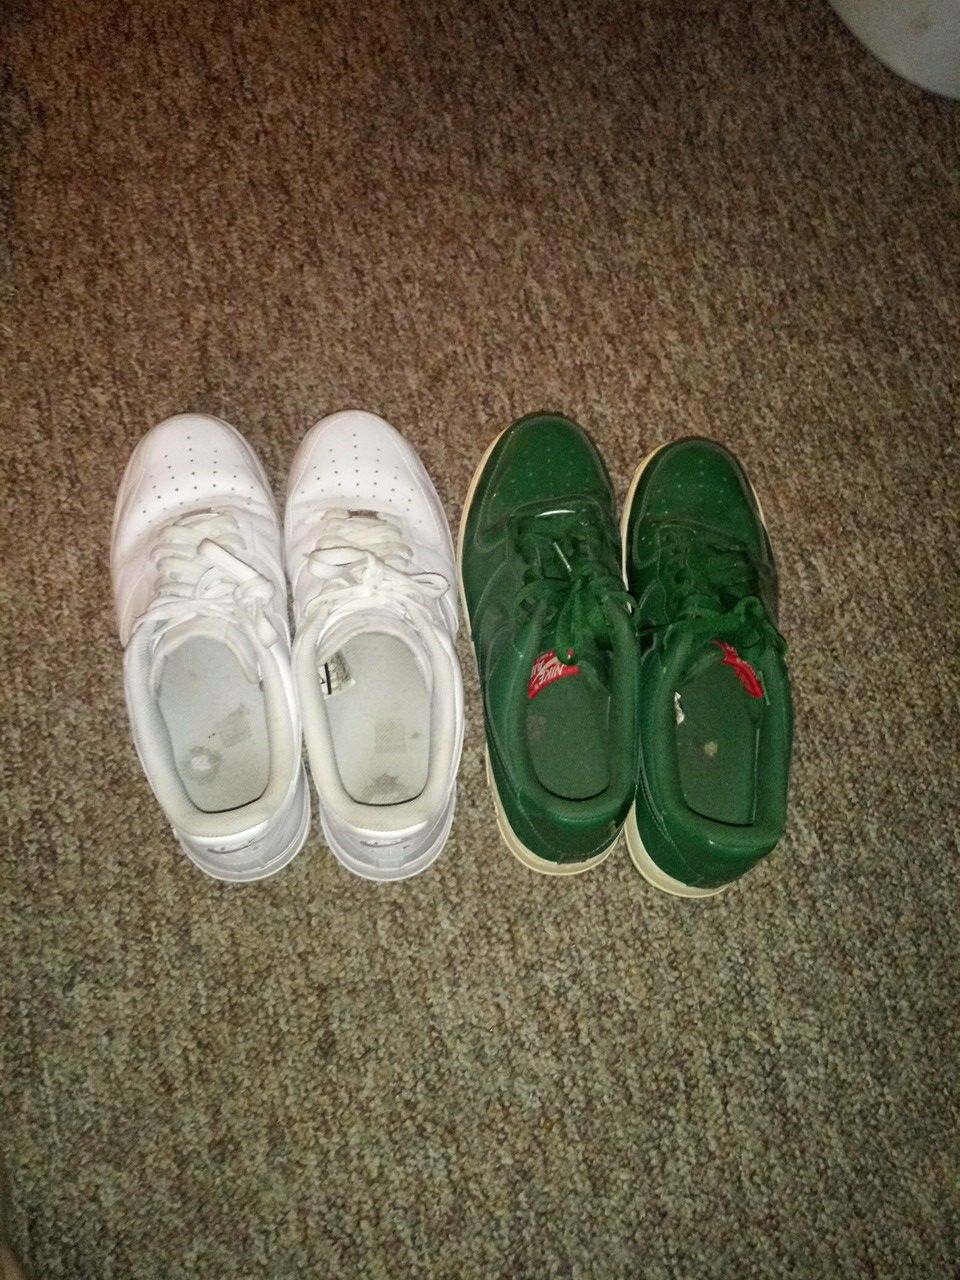 Nike af1's whte and green size 12 (Trades?)